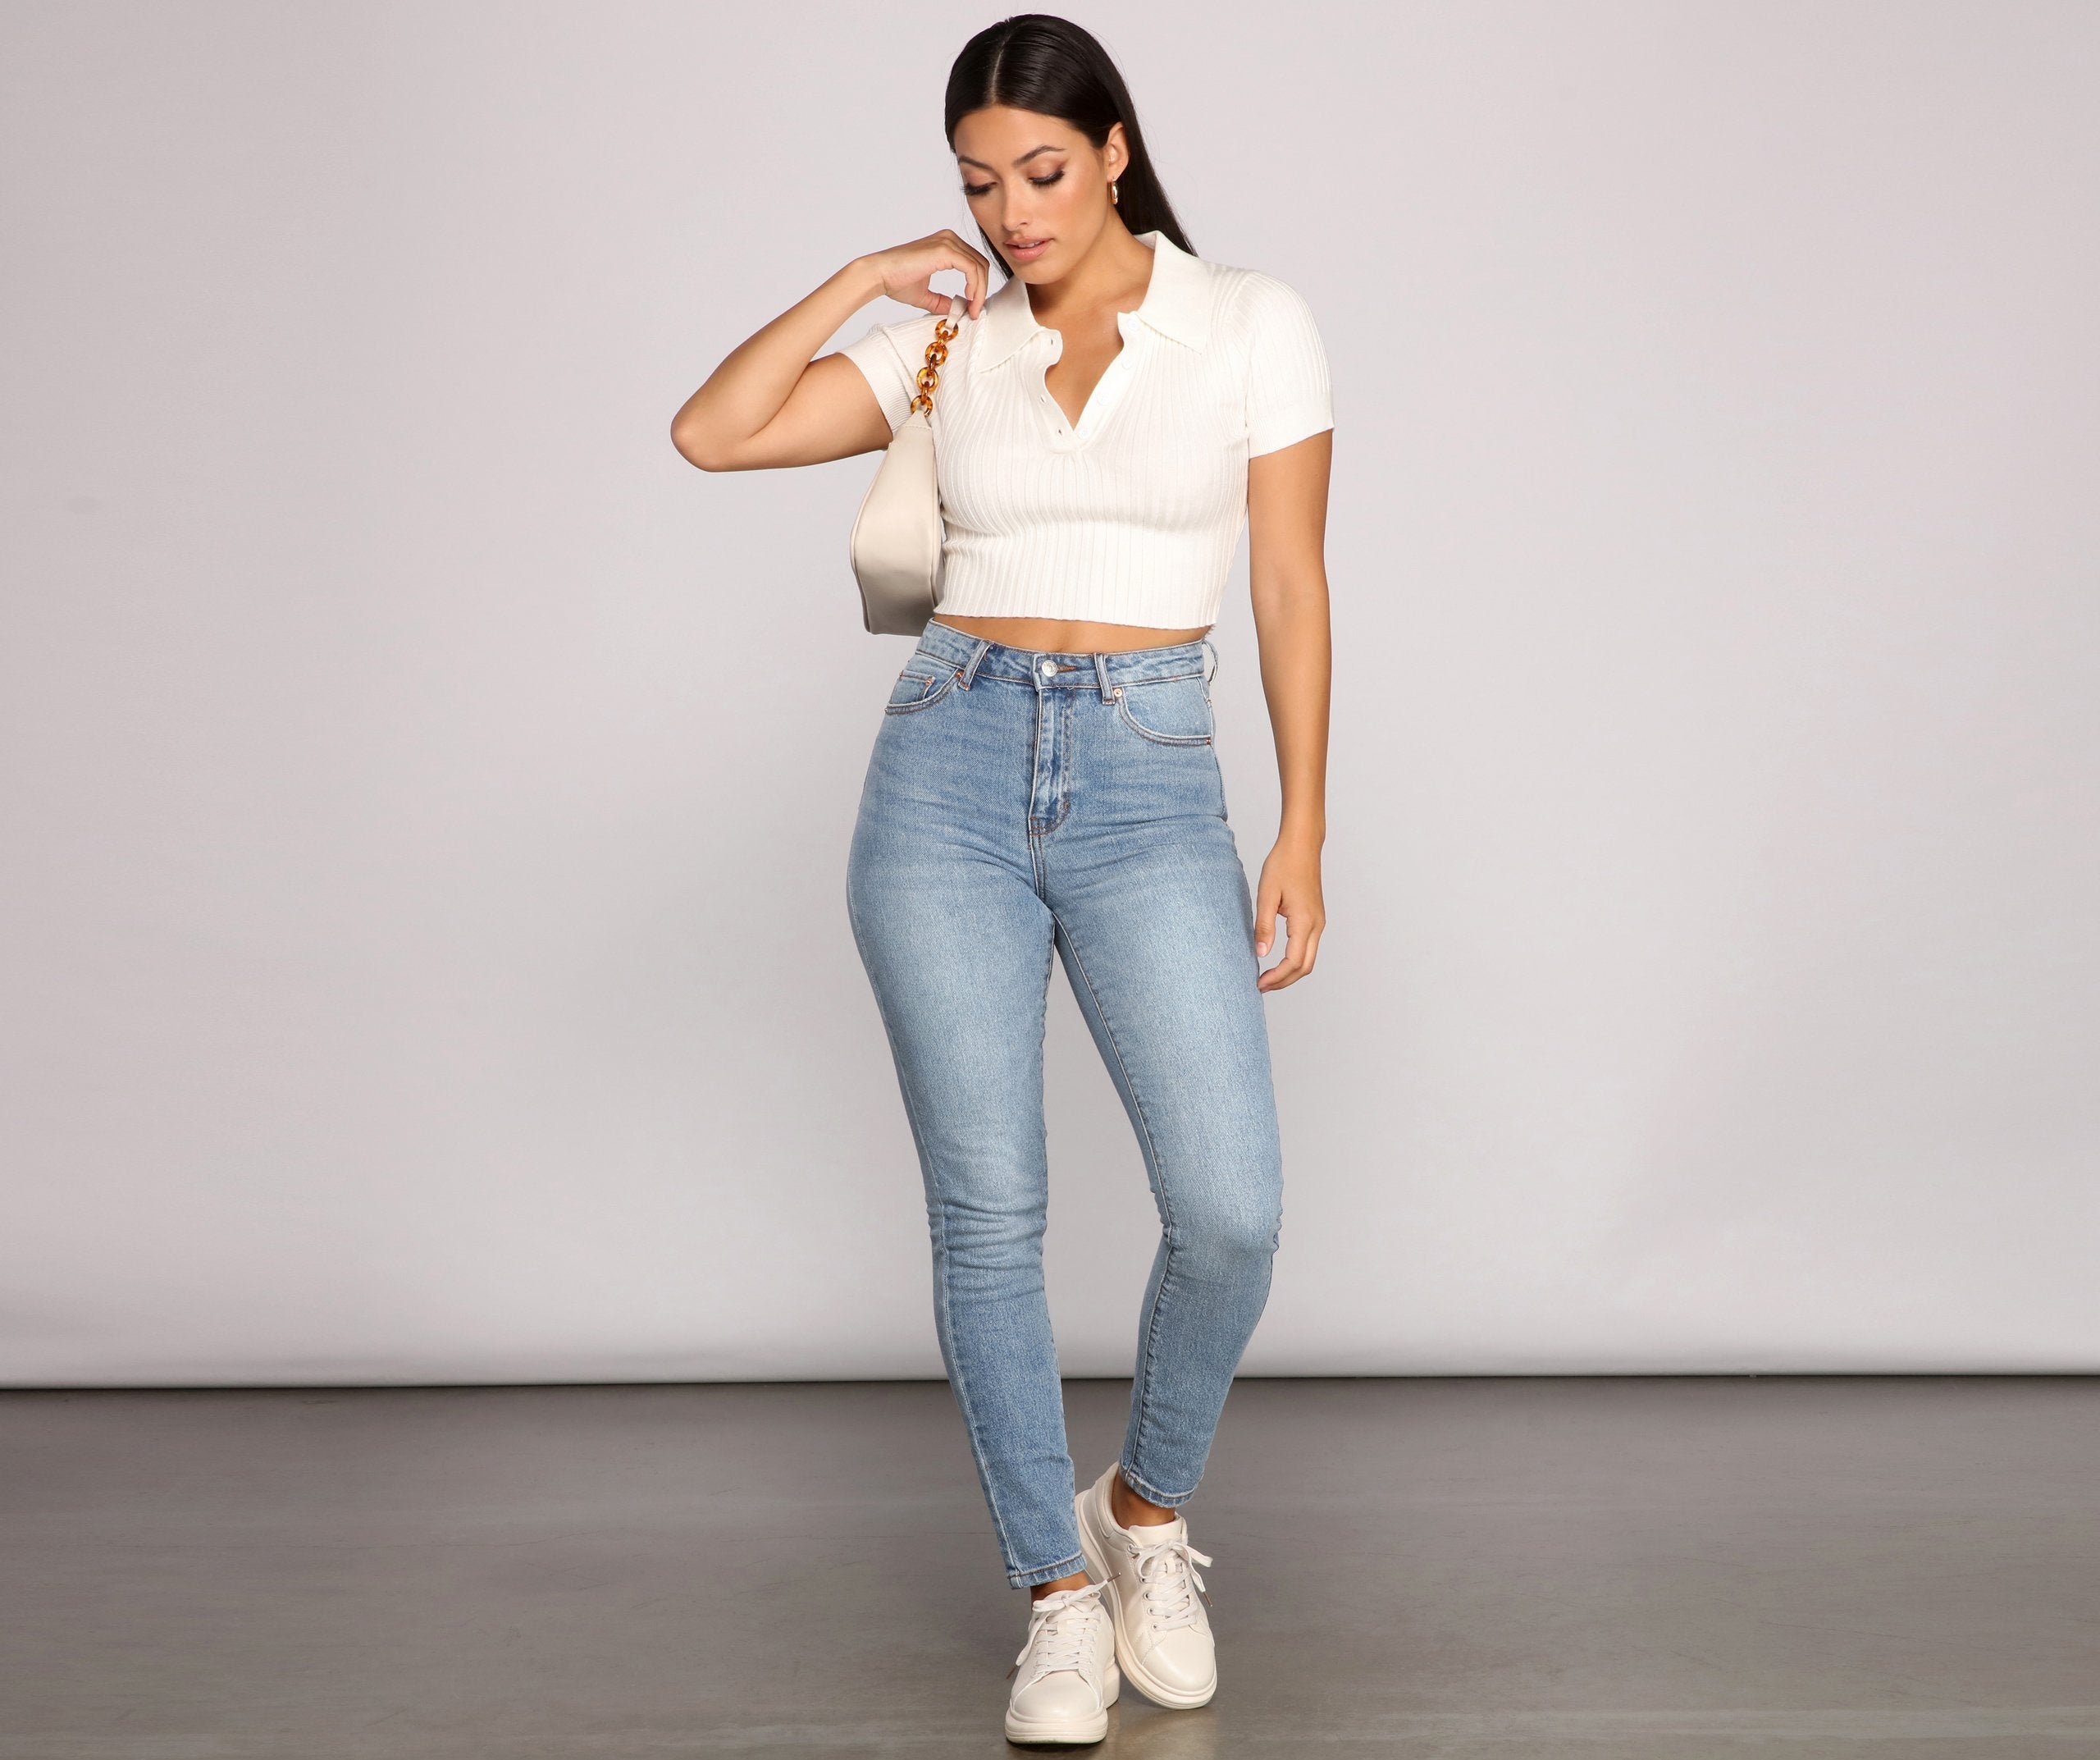 Girl Next Door High Waist Jeans - Lady Occasions